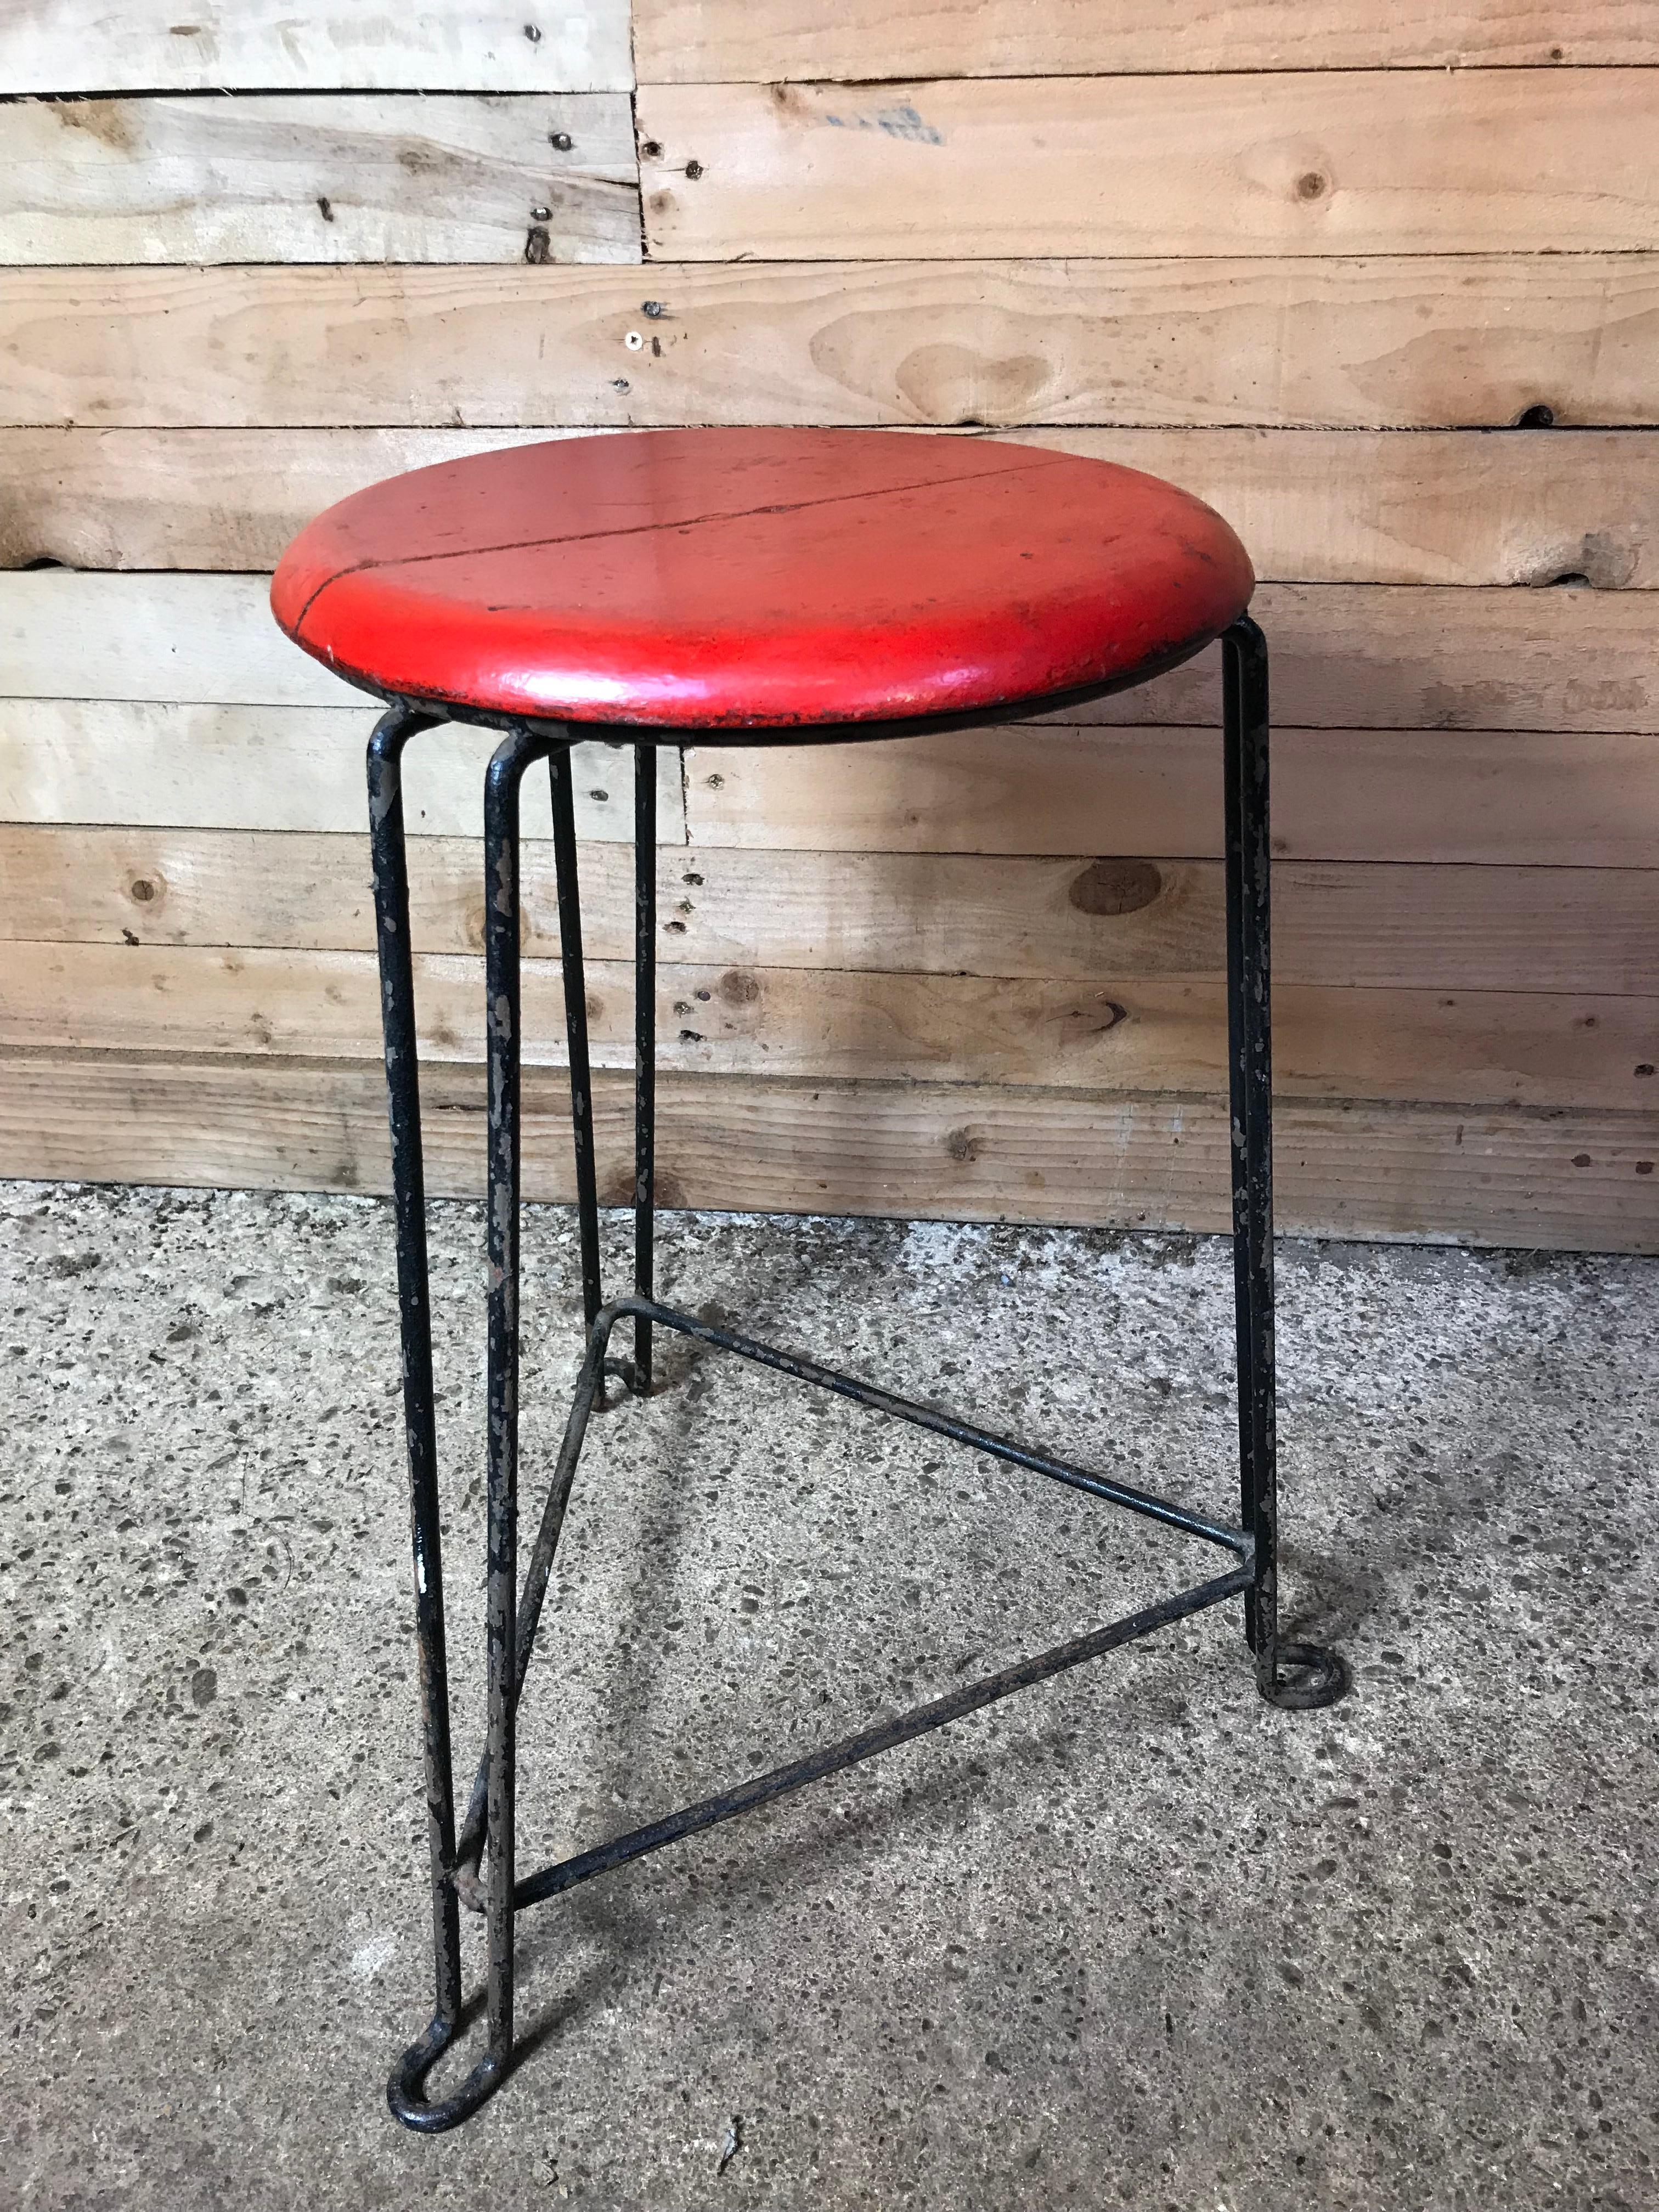 20th Century Retro 1960s Wooden Seat with Metal Frame Tomado Stool 'Red Seat' For Sale